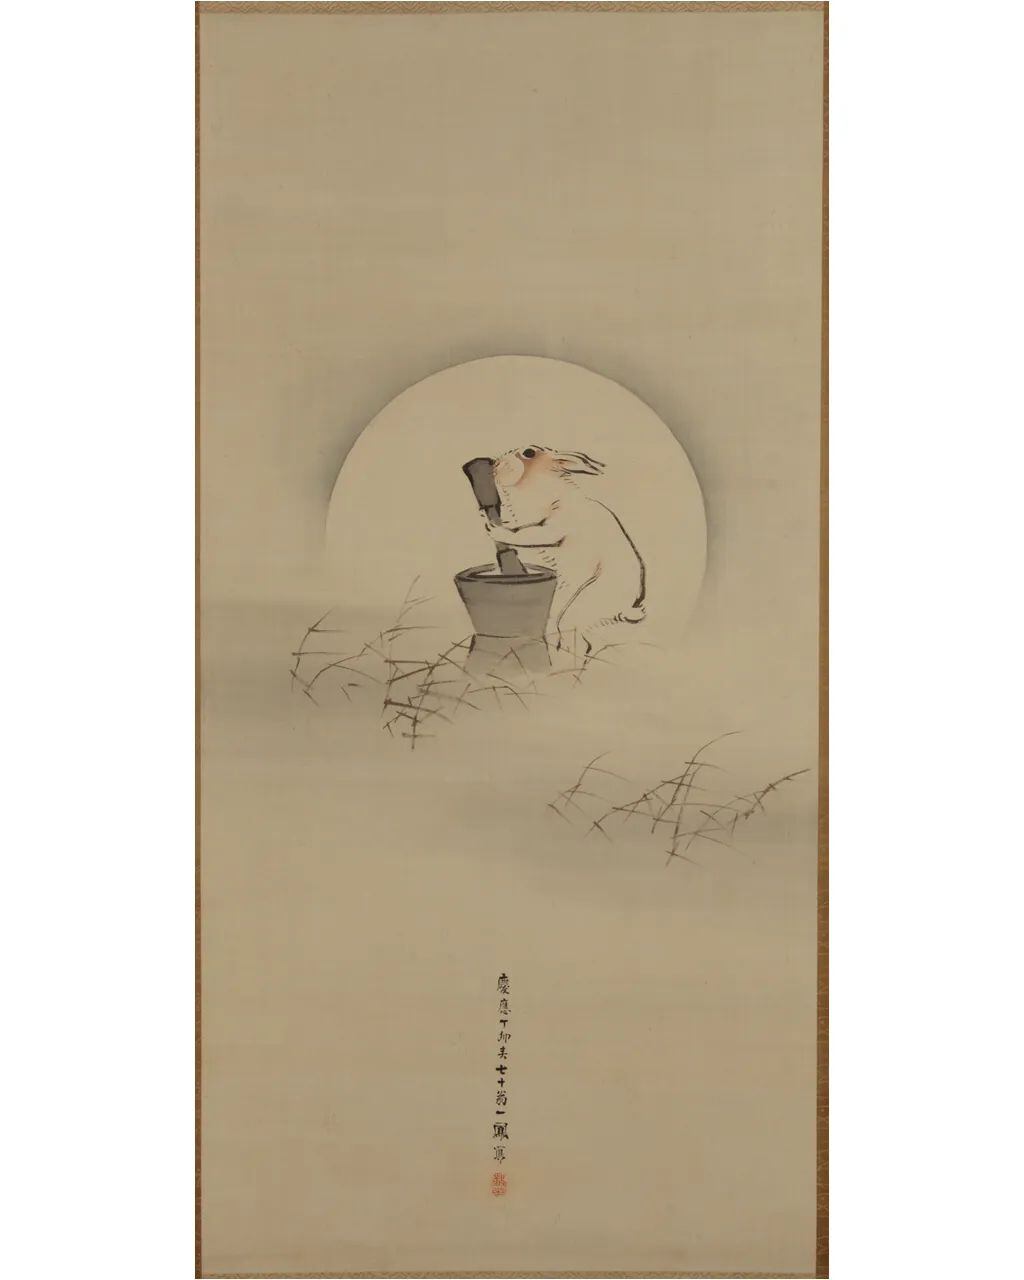 Rabbit Grinding the Elixir of Life under the Moon, by Mori Ippo, 1867. (NEW ORLEANS MUSEUM OF ART).